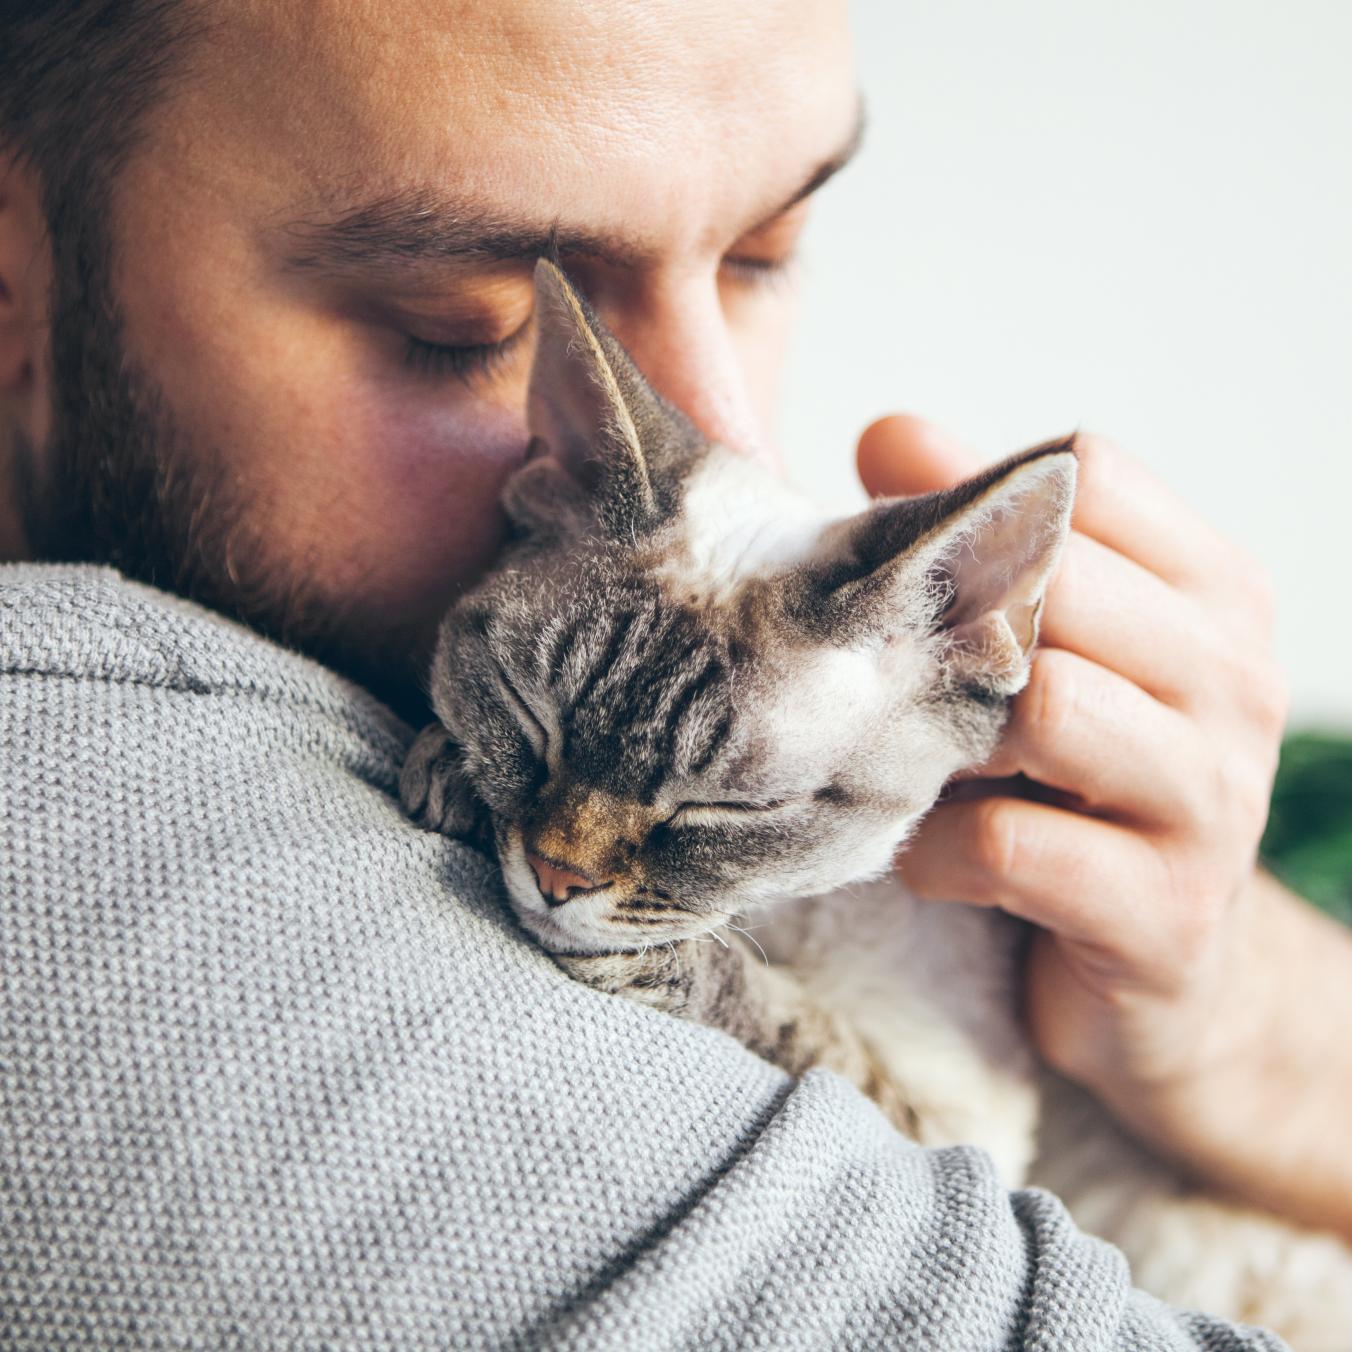 Have You Hugged Your Cat Today?